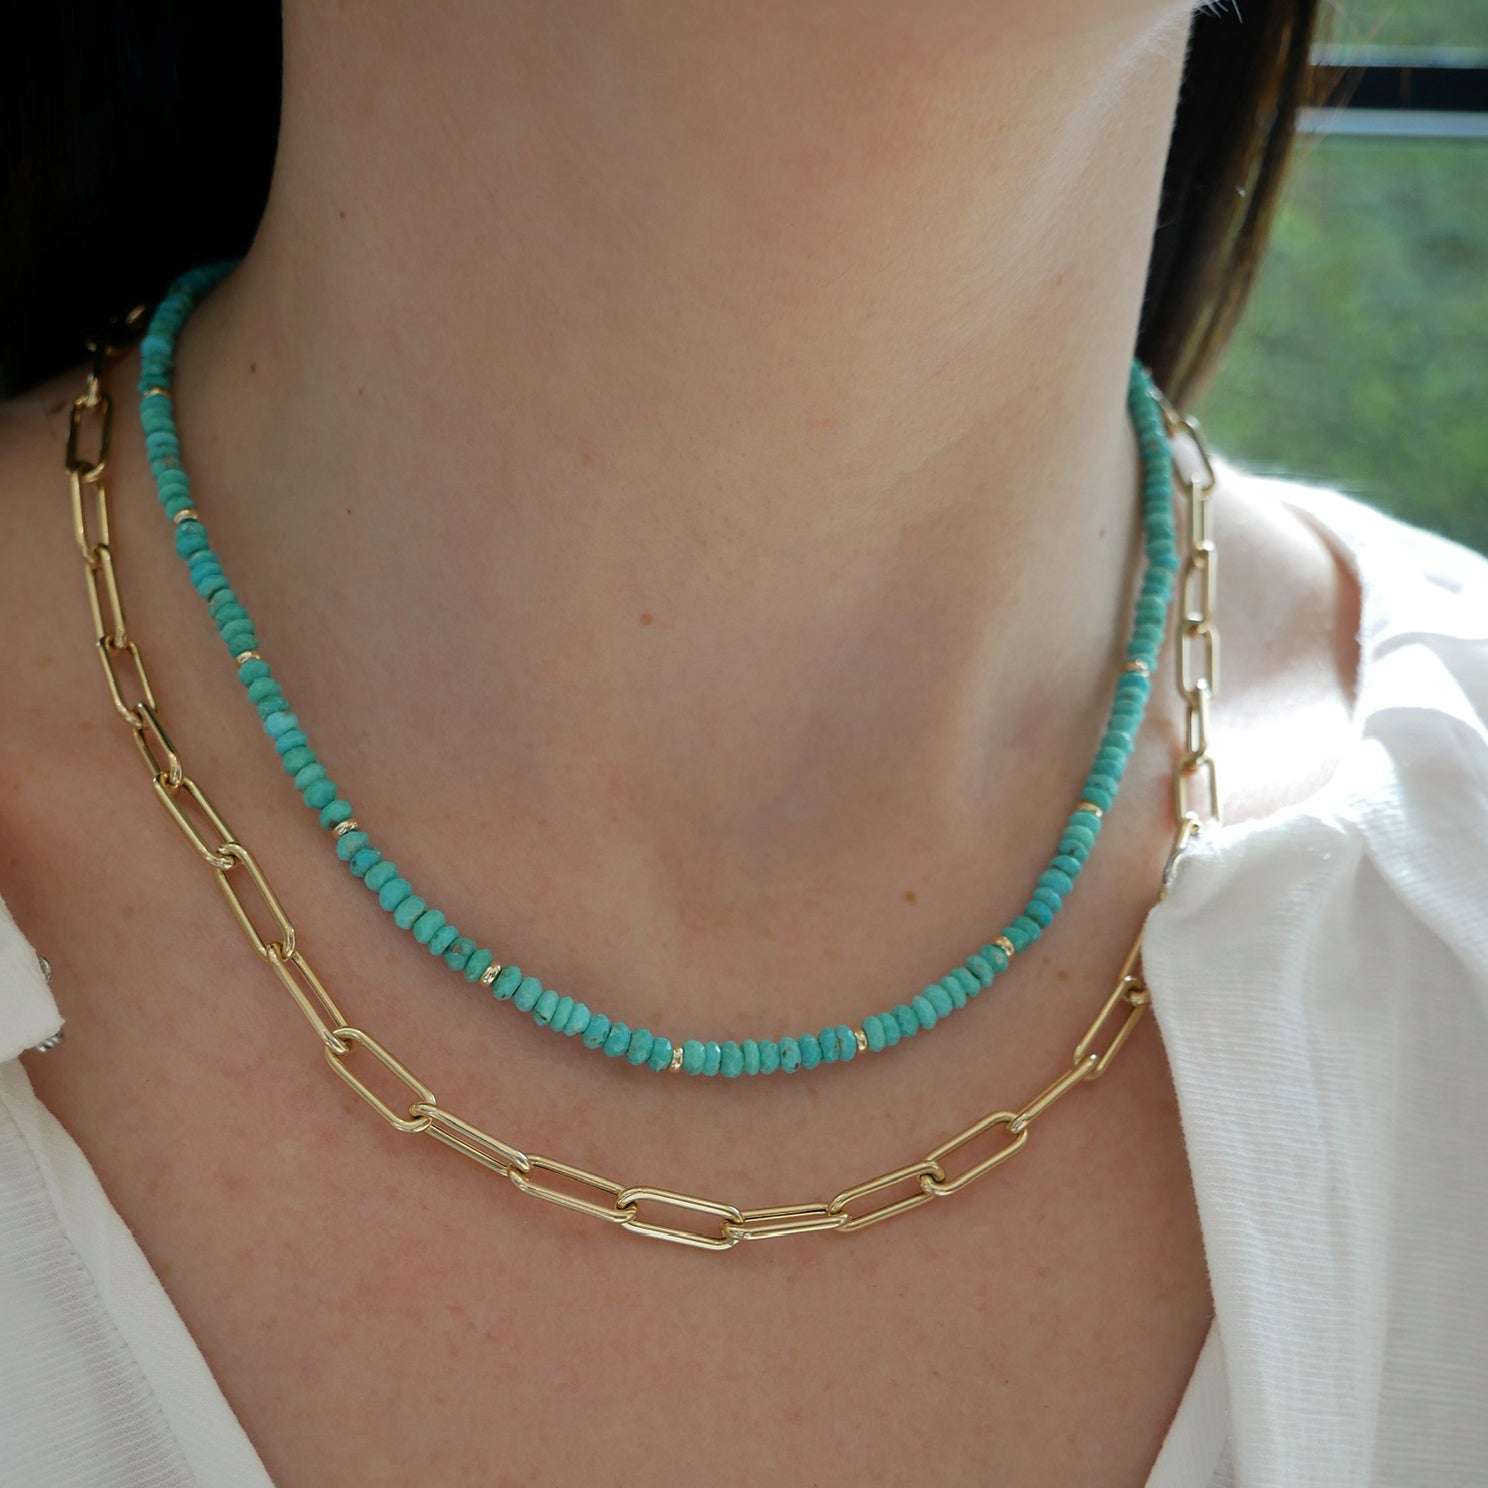 Birthstone Bead Necklace In Turquoise styled on neck of model wearing gold lola chain necklace